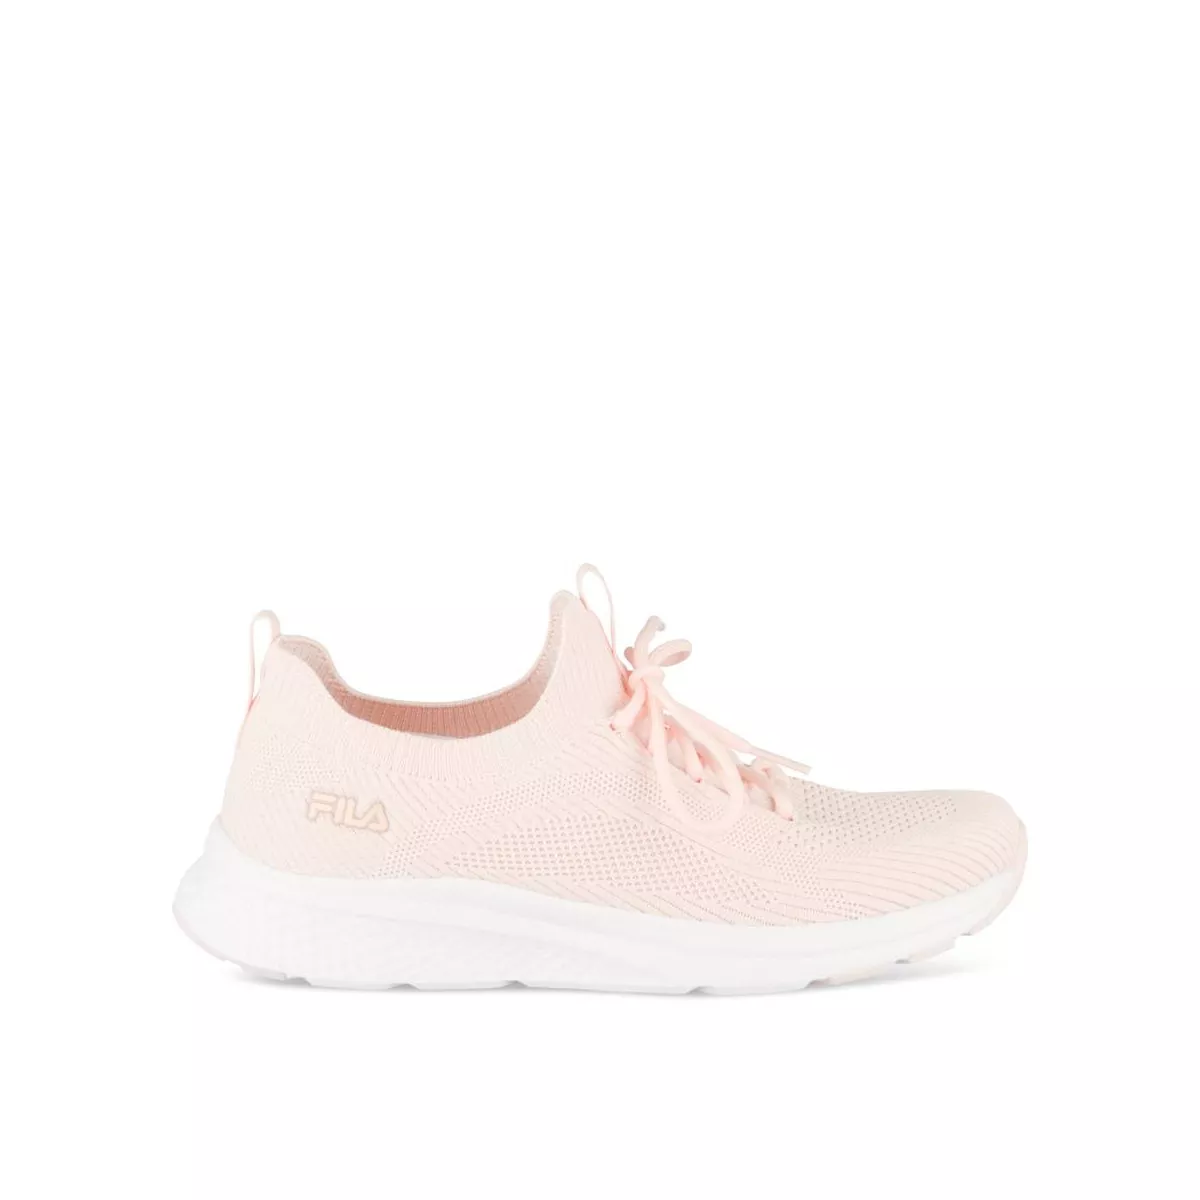 Share more than 256 fila light pink sneakers best